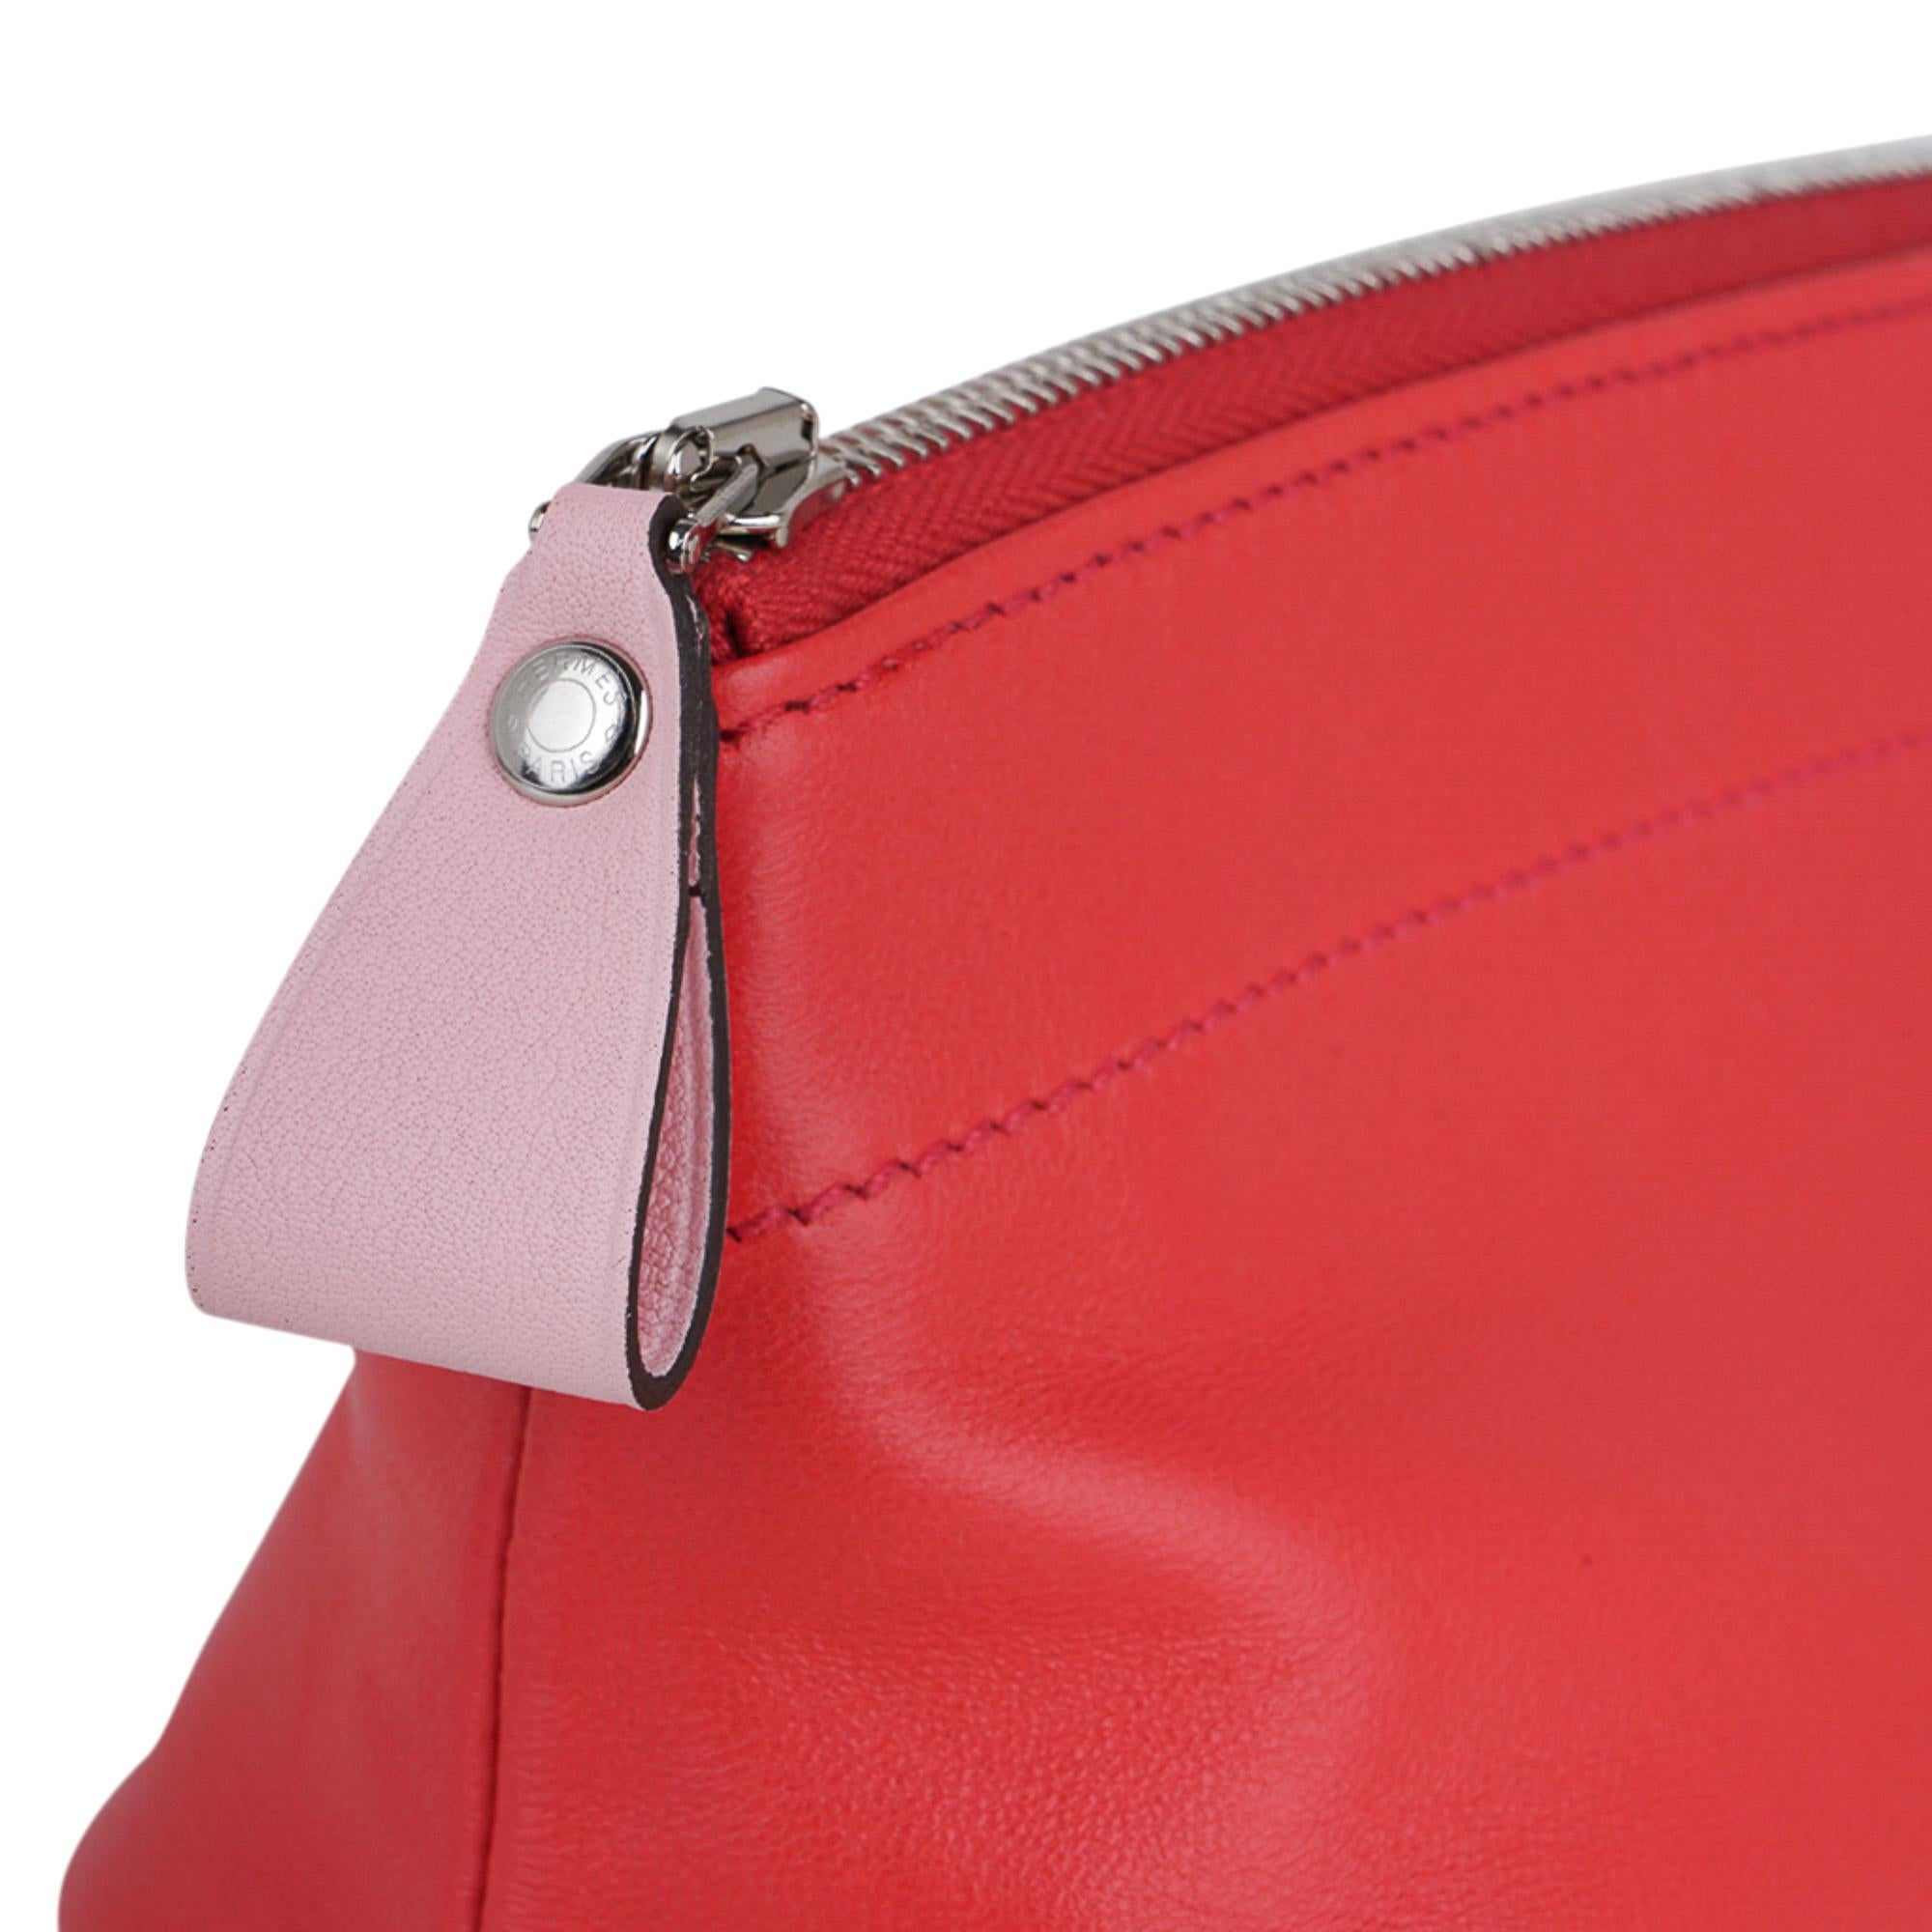 Mightychic offers an Hermes Tohubohu Pouch PM Small model featured in Rose Jaipur pink.
A multifunctional piece in butter soft Milo Lambskin.
Top zip has a Rose Sakura lambskin leather pull.
Tone on tone stitch.
Interior is Rose Sakura Lambskin and